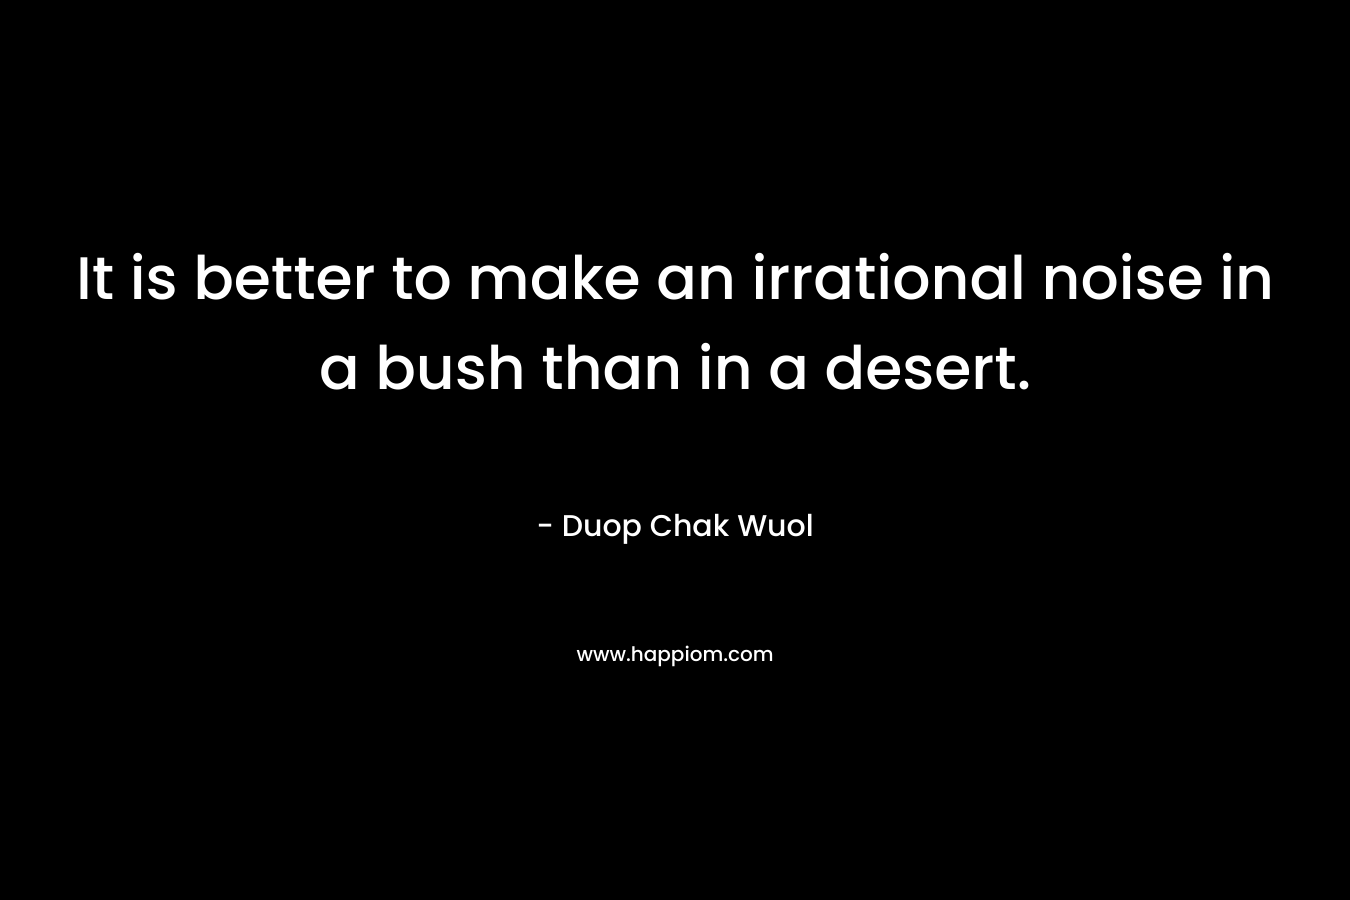 It is better to make an irrational noise in a bush than in a desert. – Duop Chak Wuol